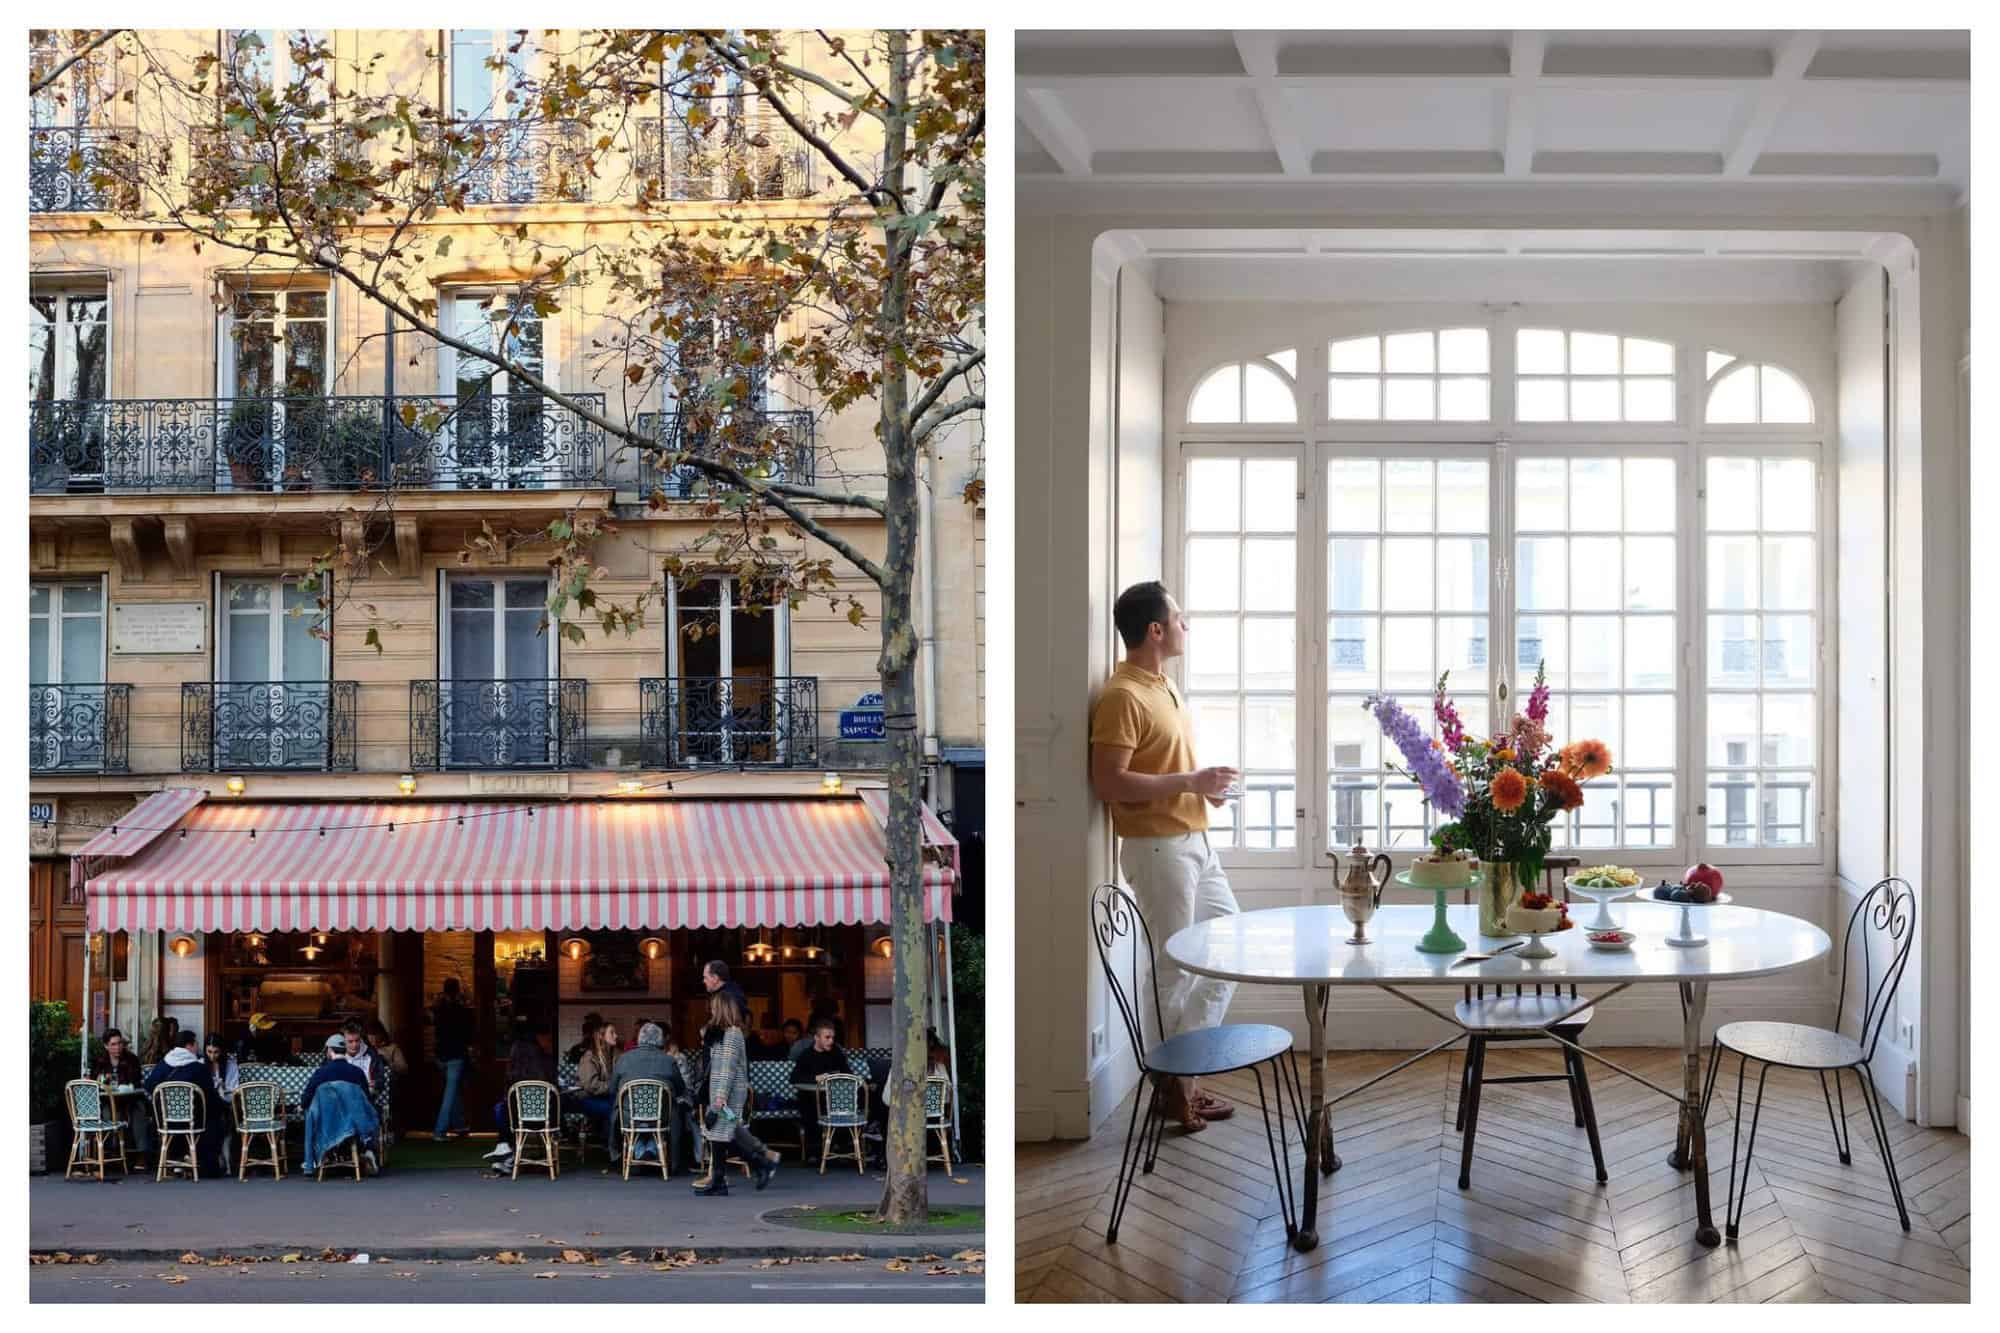 Left: A cafe with a red and white stripe awning is shown in St. Germain, Paris. Right: Frank looks out the window of his cake studio. A table is set with cake, a tea pot, and flowers. 